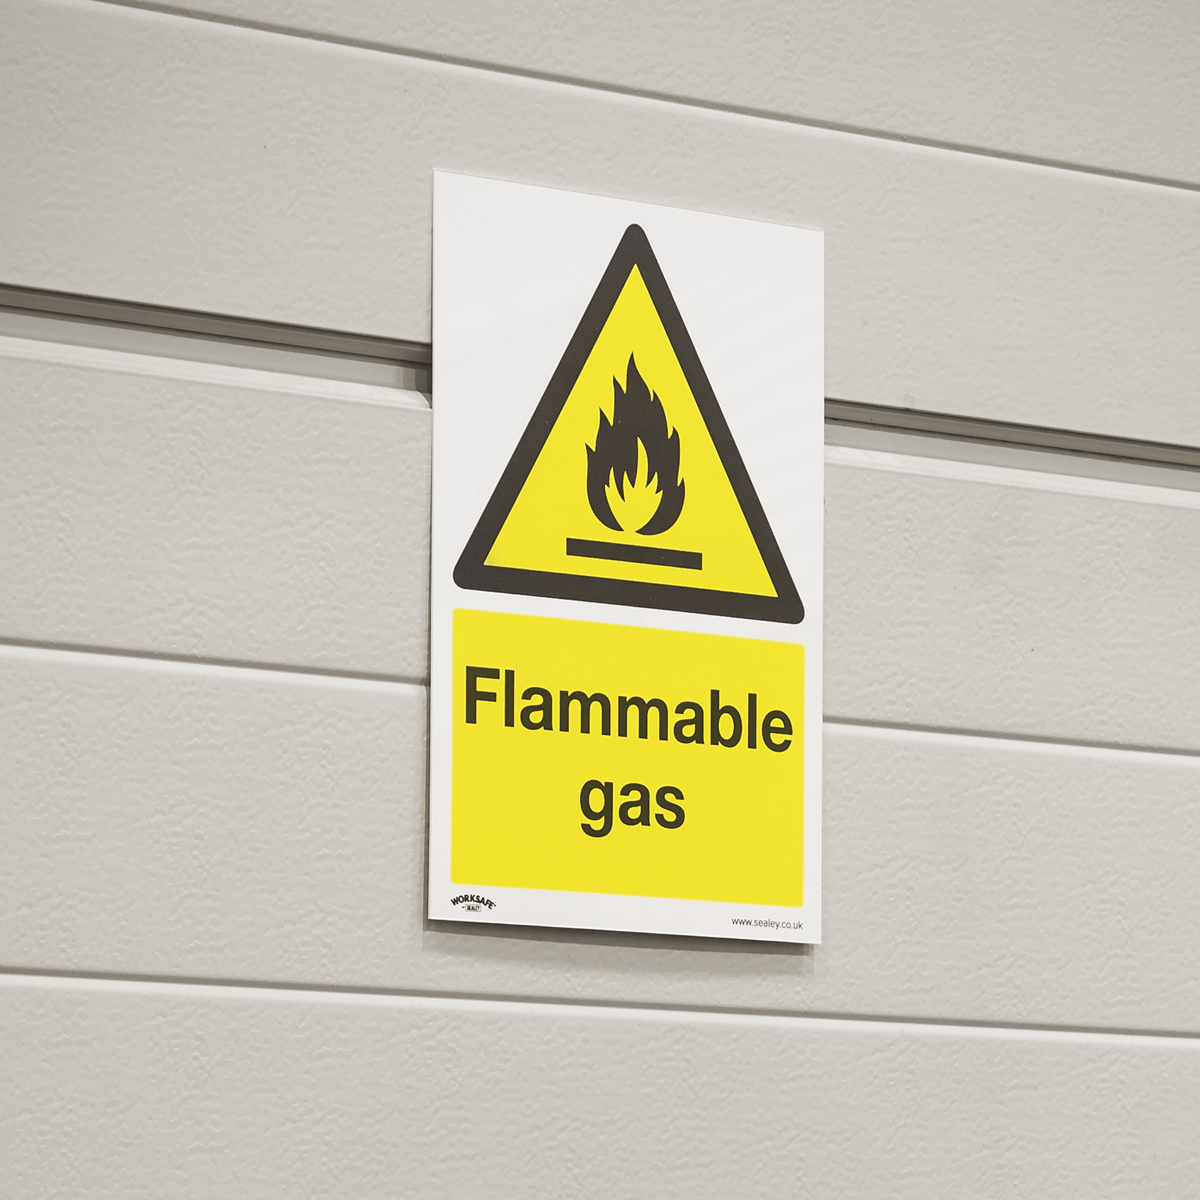 Sealey Warning Safety Sign - Flammable Gas - Self-Adhesive Vinyl